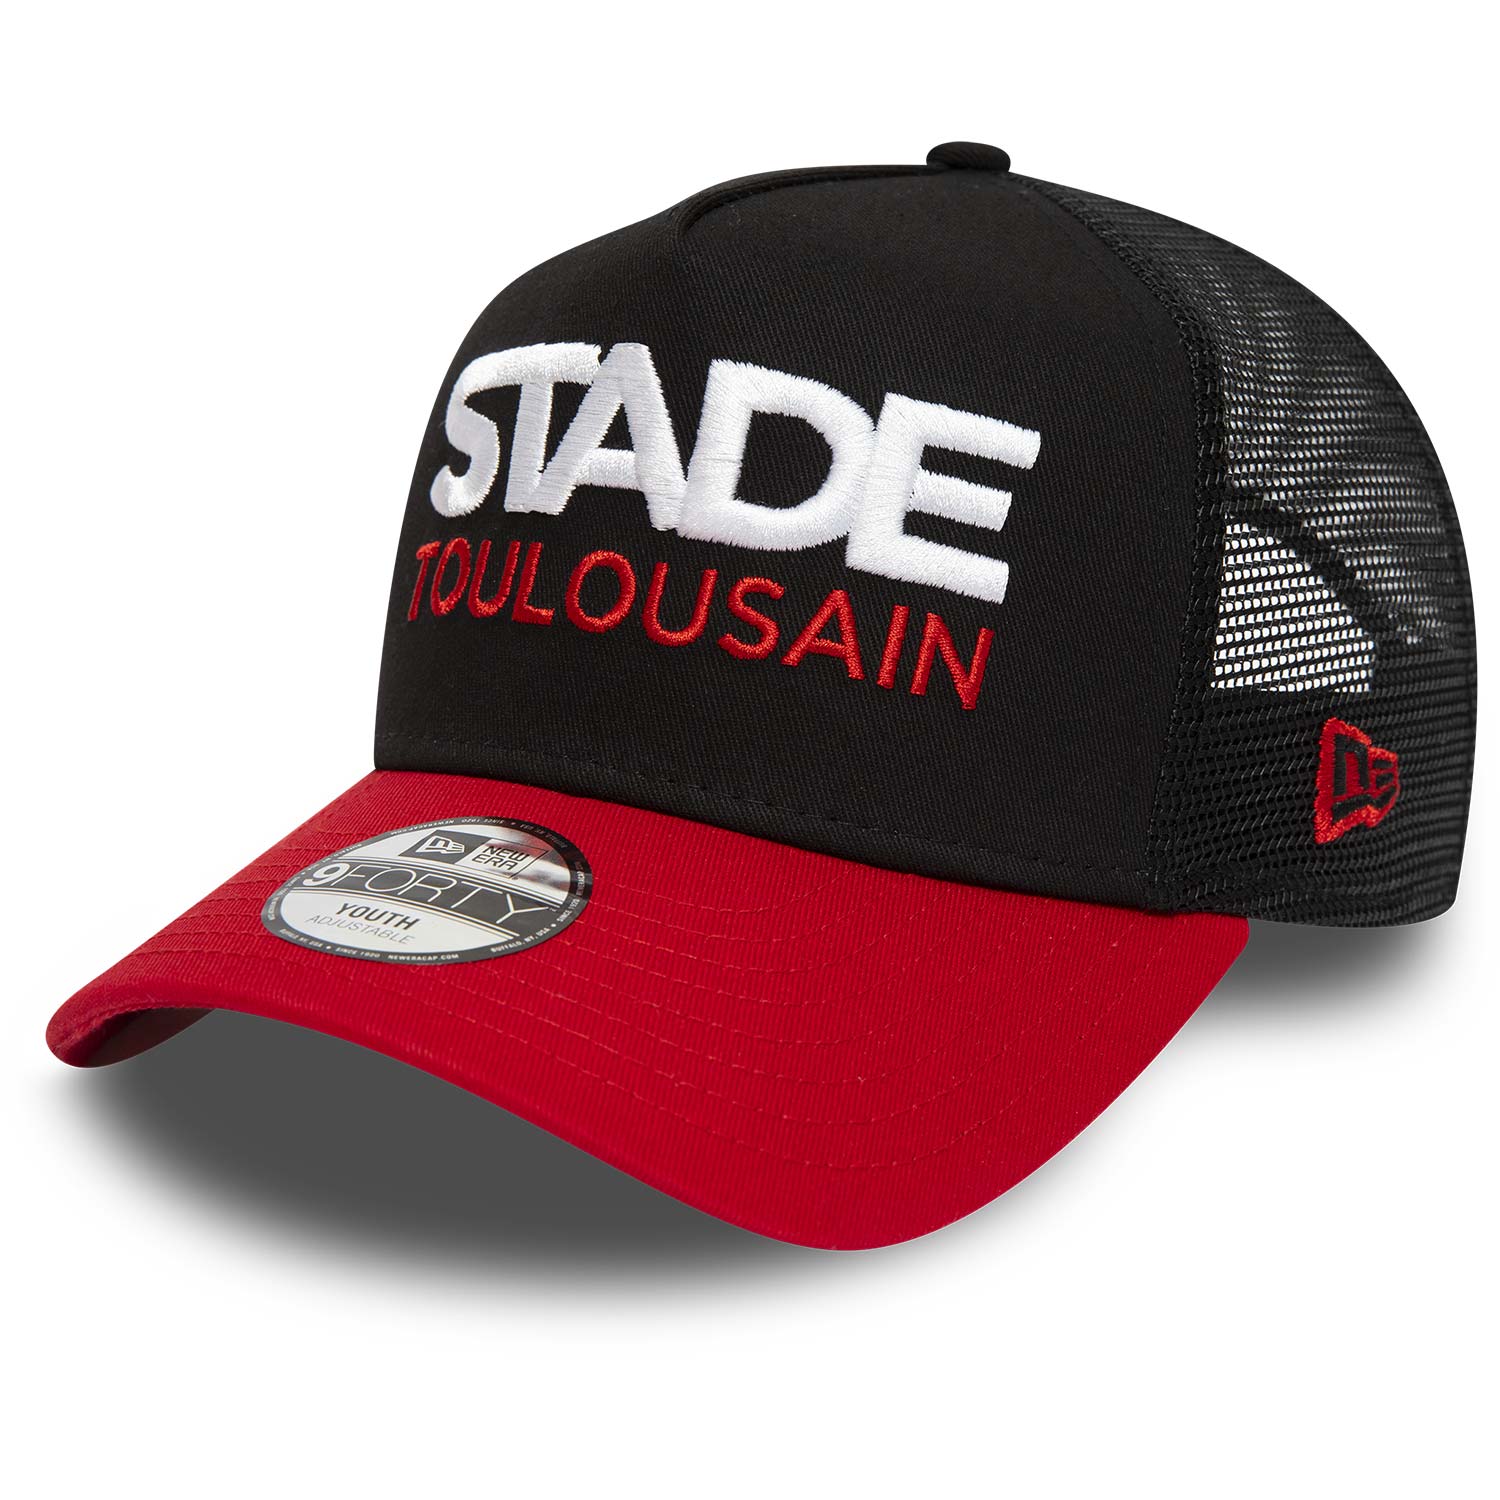 Stade Toulousain Two Tone Black 9FORTY Youth Cap